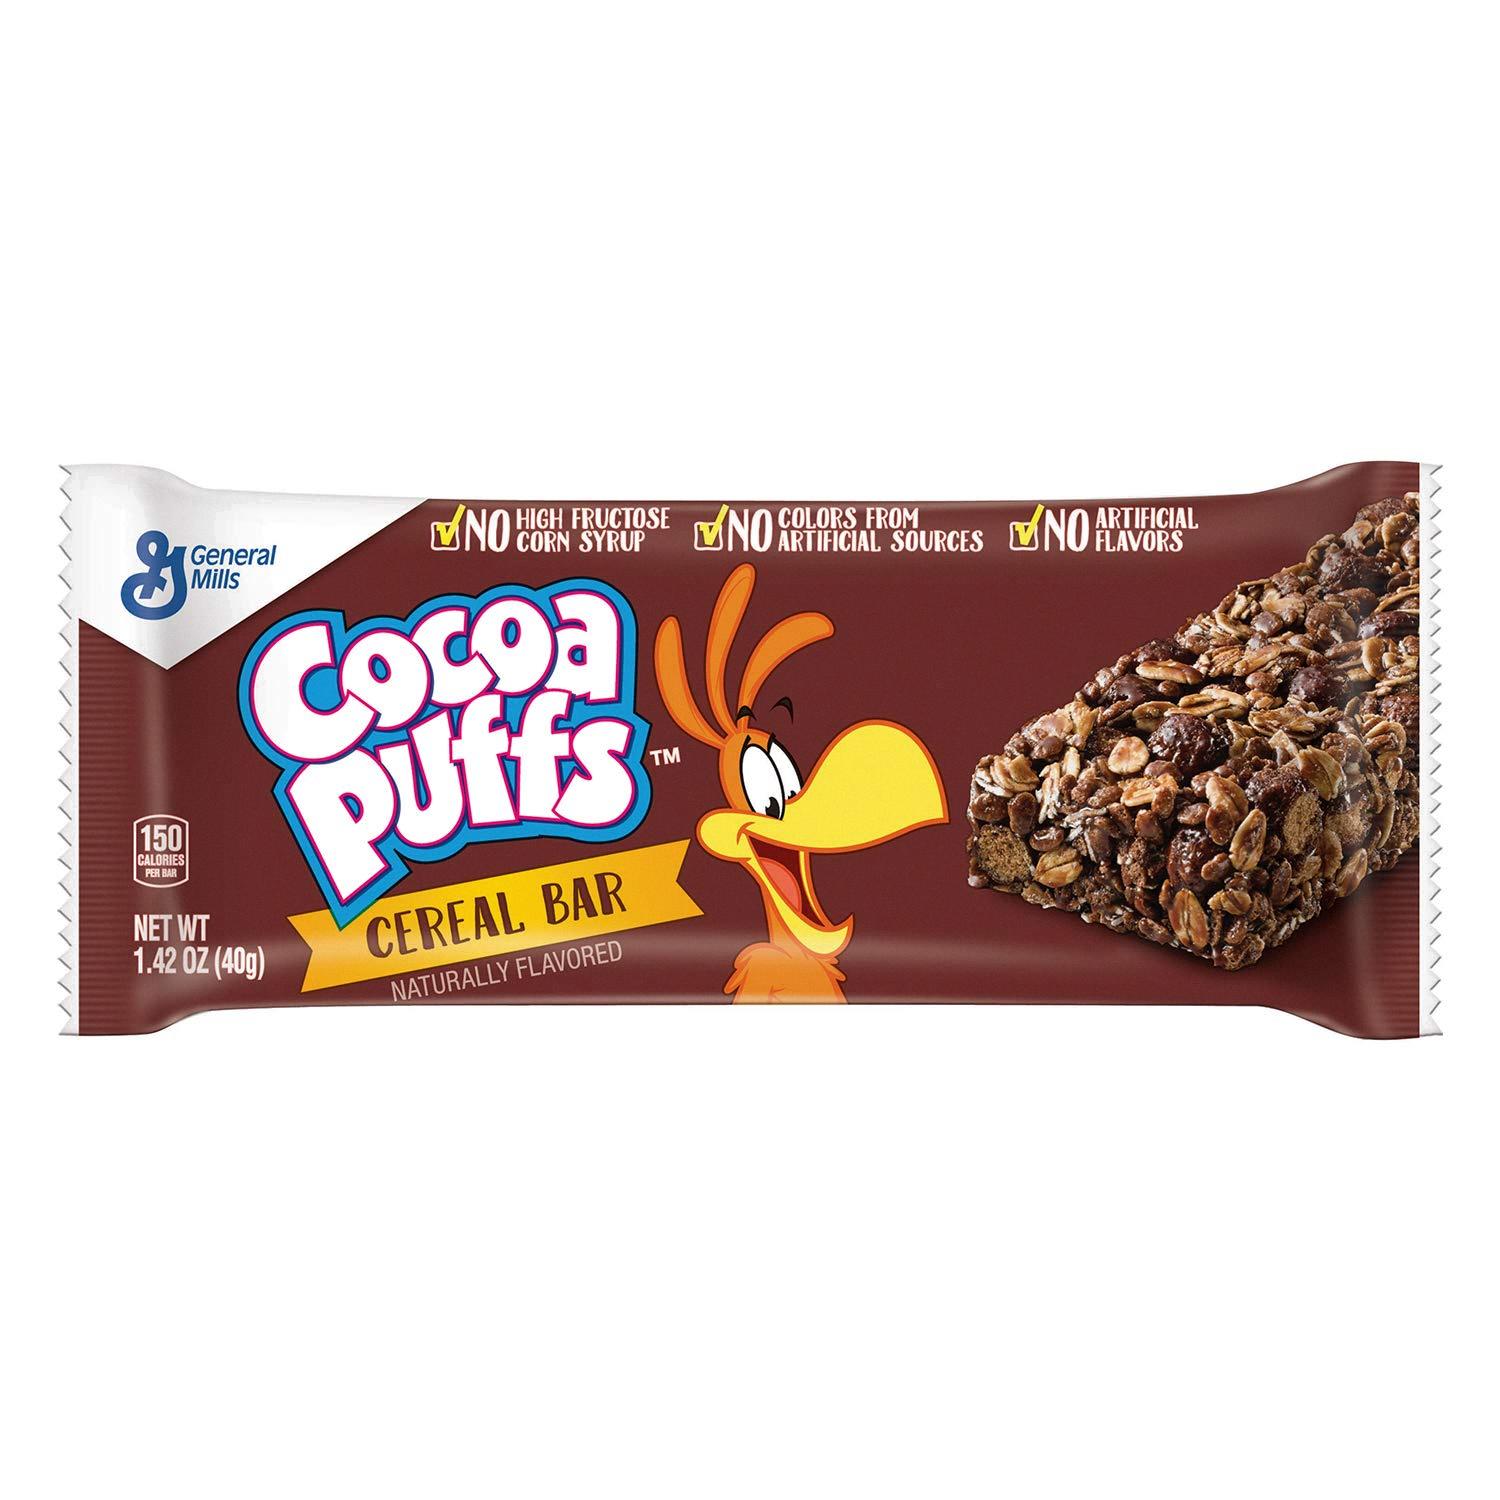 coo coo for coco puffs